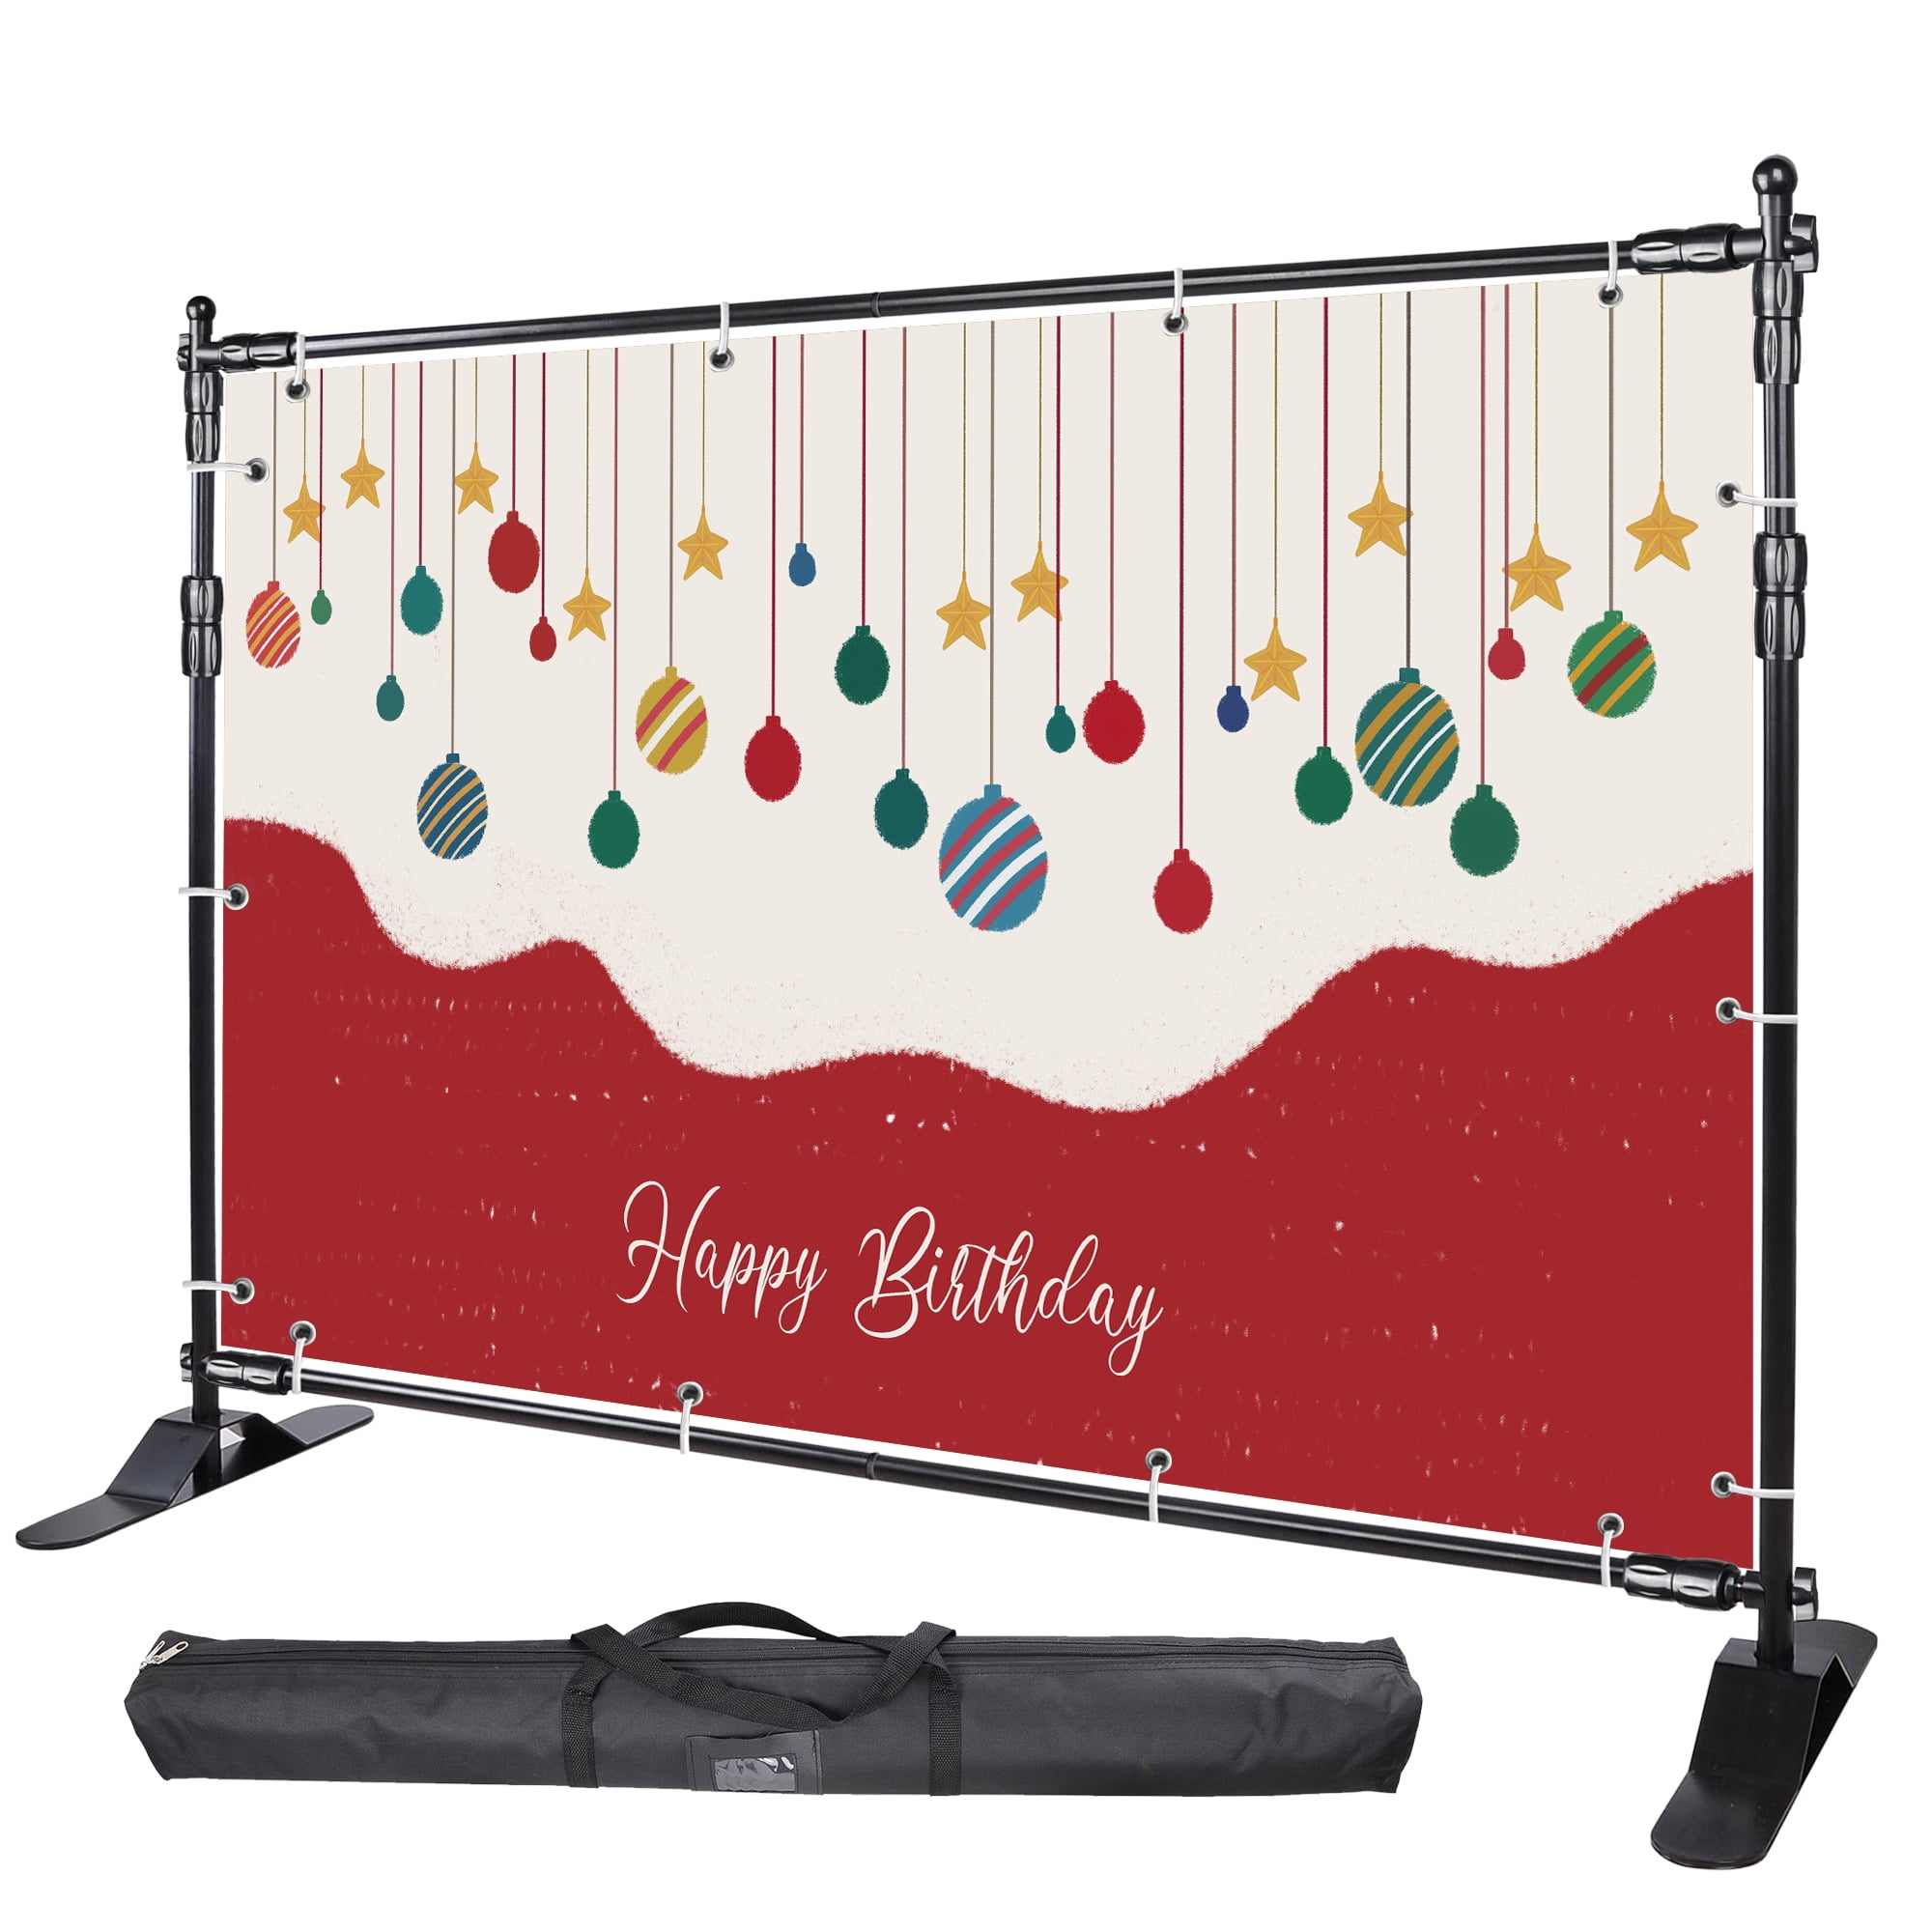 WinSpin FBA_35BST001-8X8-06 Adjustable Display Banner Stand Black for sale online 